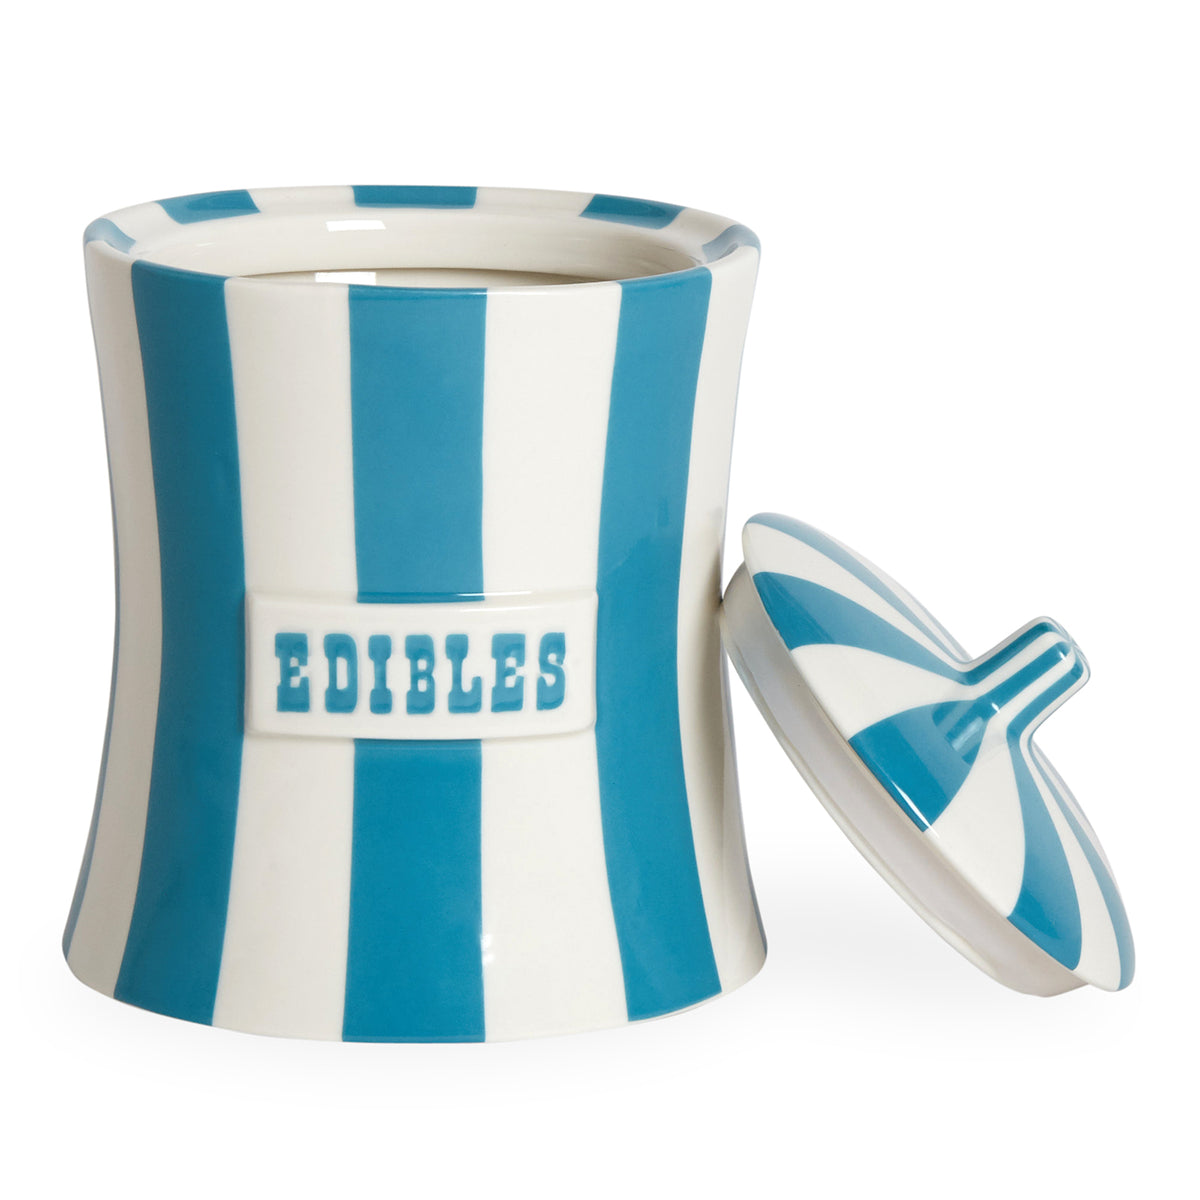 Vice Edibles Canister by Jonathan Adler